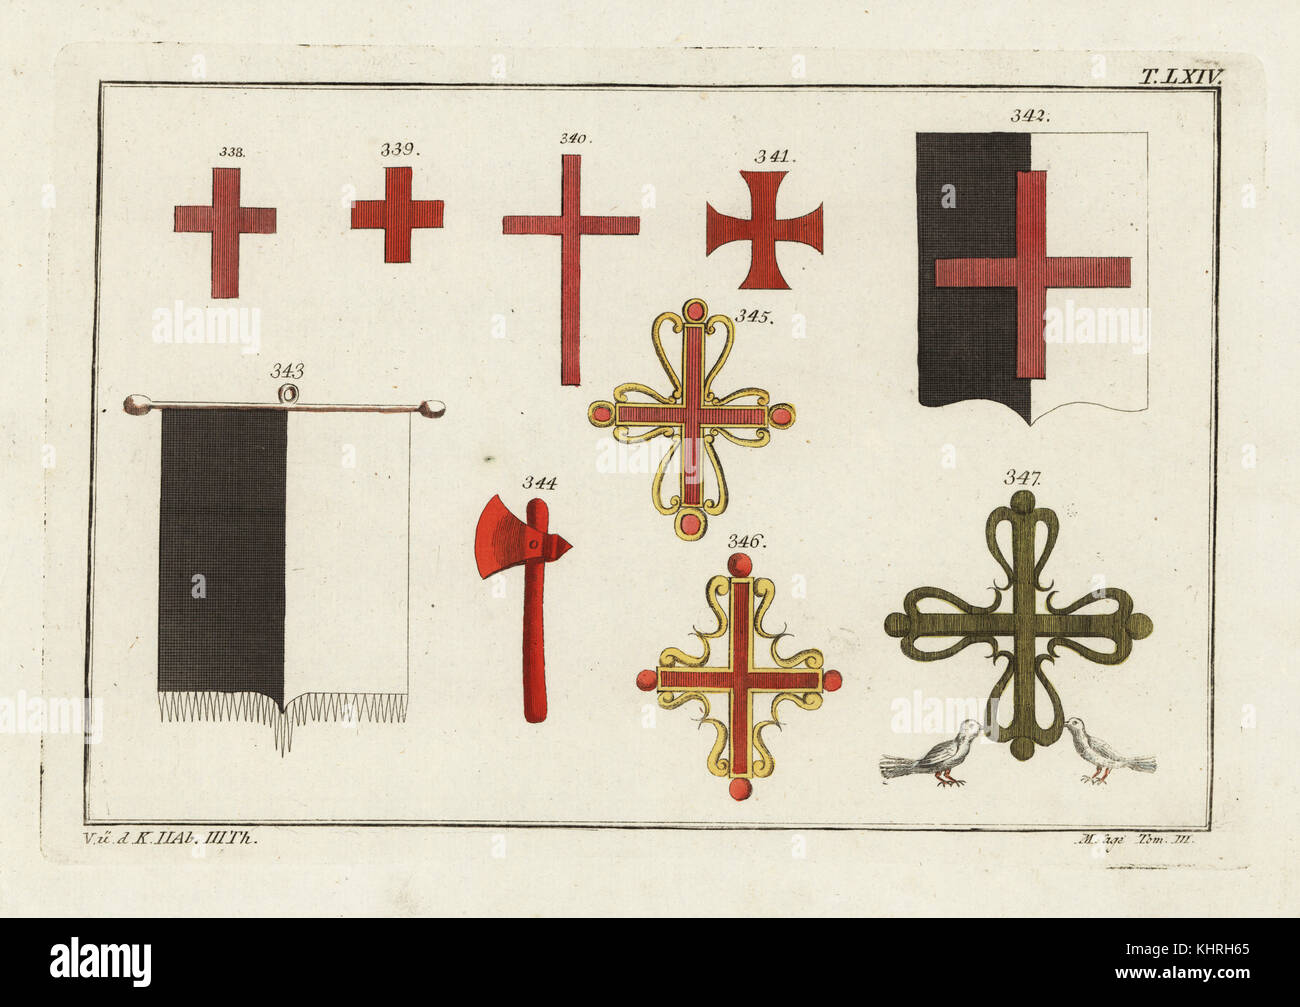 Crosses of  various orders of Knights Templar 338-341, coat of arms 342, flag 343, axe of the woman's order of the hatchet 344, Order of Alcantara 345, Order of Calatrava 346, and Order of Aviz 347. Copied from Jacques Charles Bar's Costumes des ordres religieux et militaires, 1778. Handcoloured copperplate engraving from Robert von Spalart's Historical Picture of the Costumes of the Principal People of Antiquity and of the Middle Ages, Chez Collignon, Metz, 1810. Stock Photo